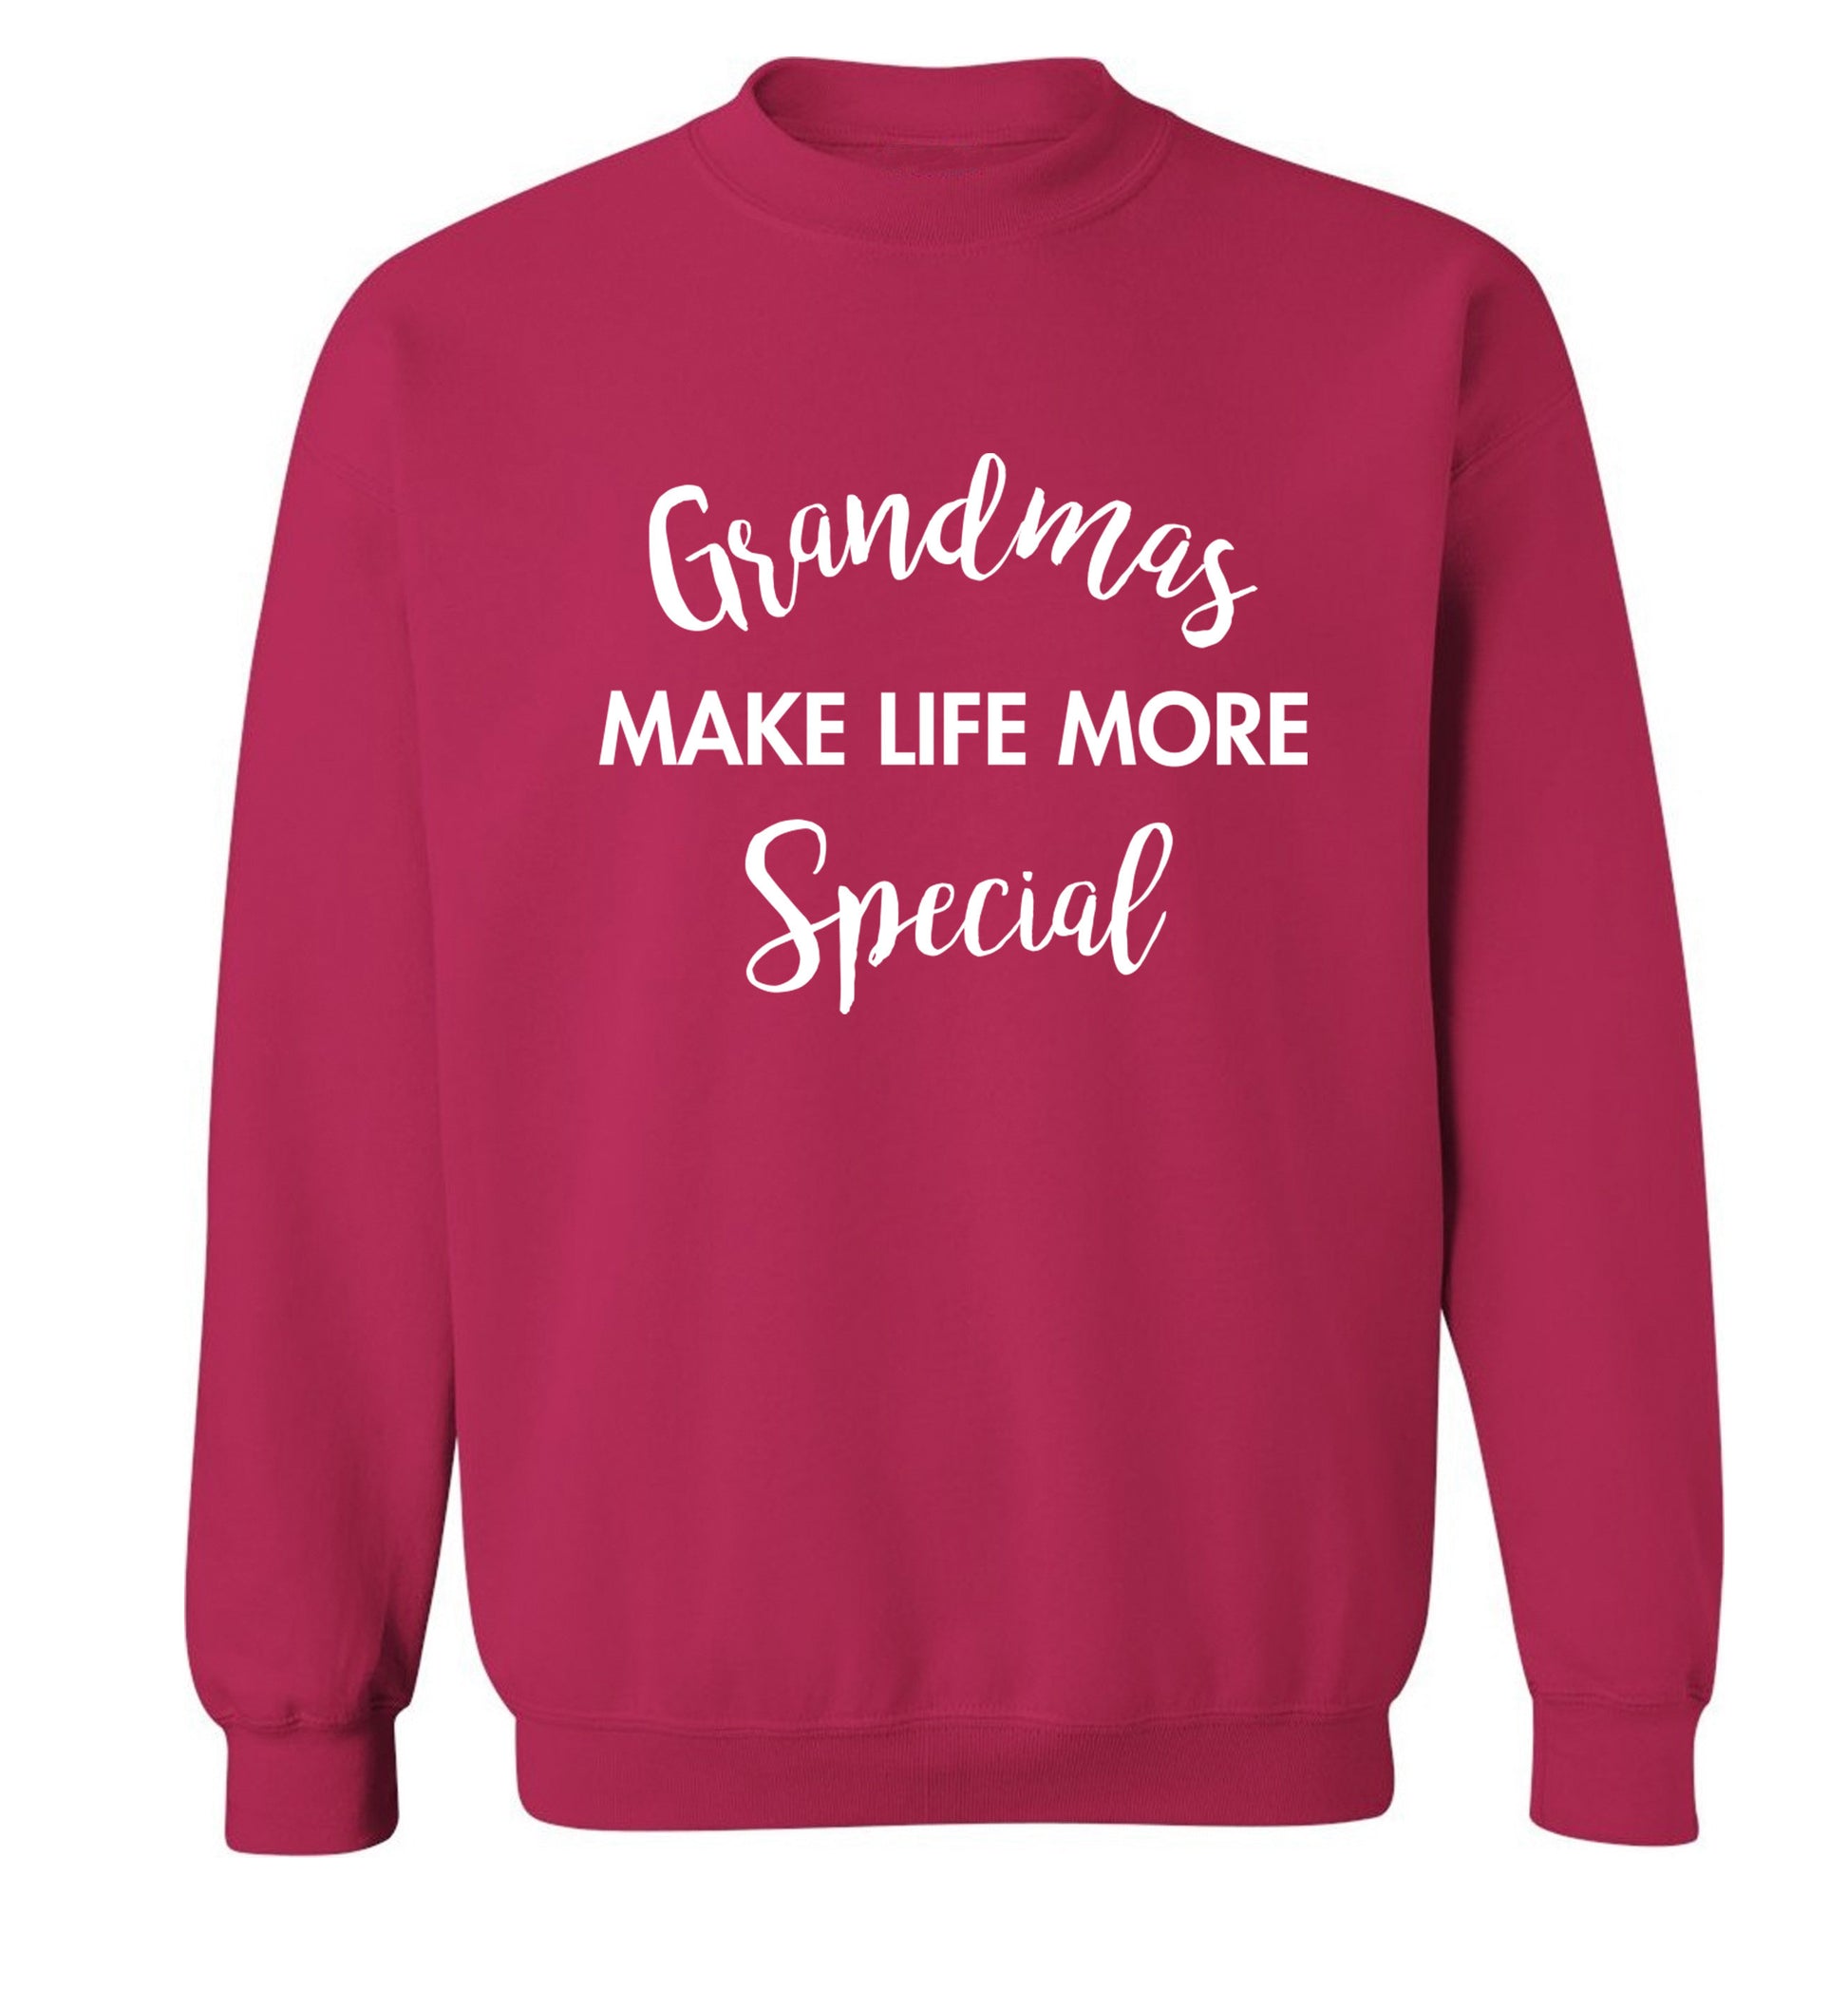 Grandmas make life more special Adult's unisex pink Sweater 2XL